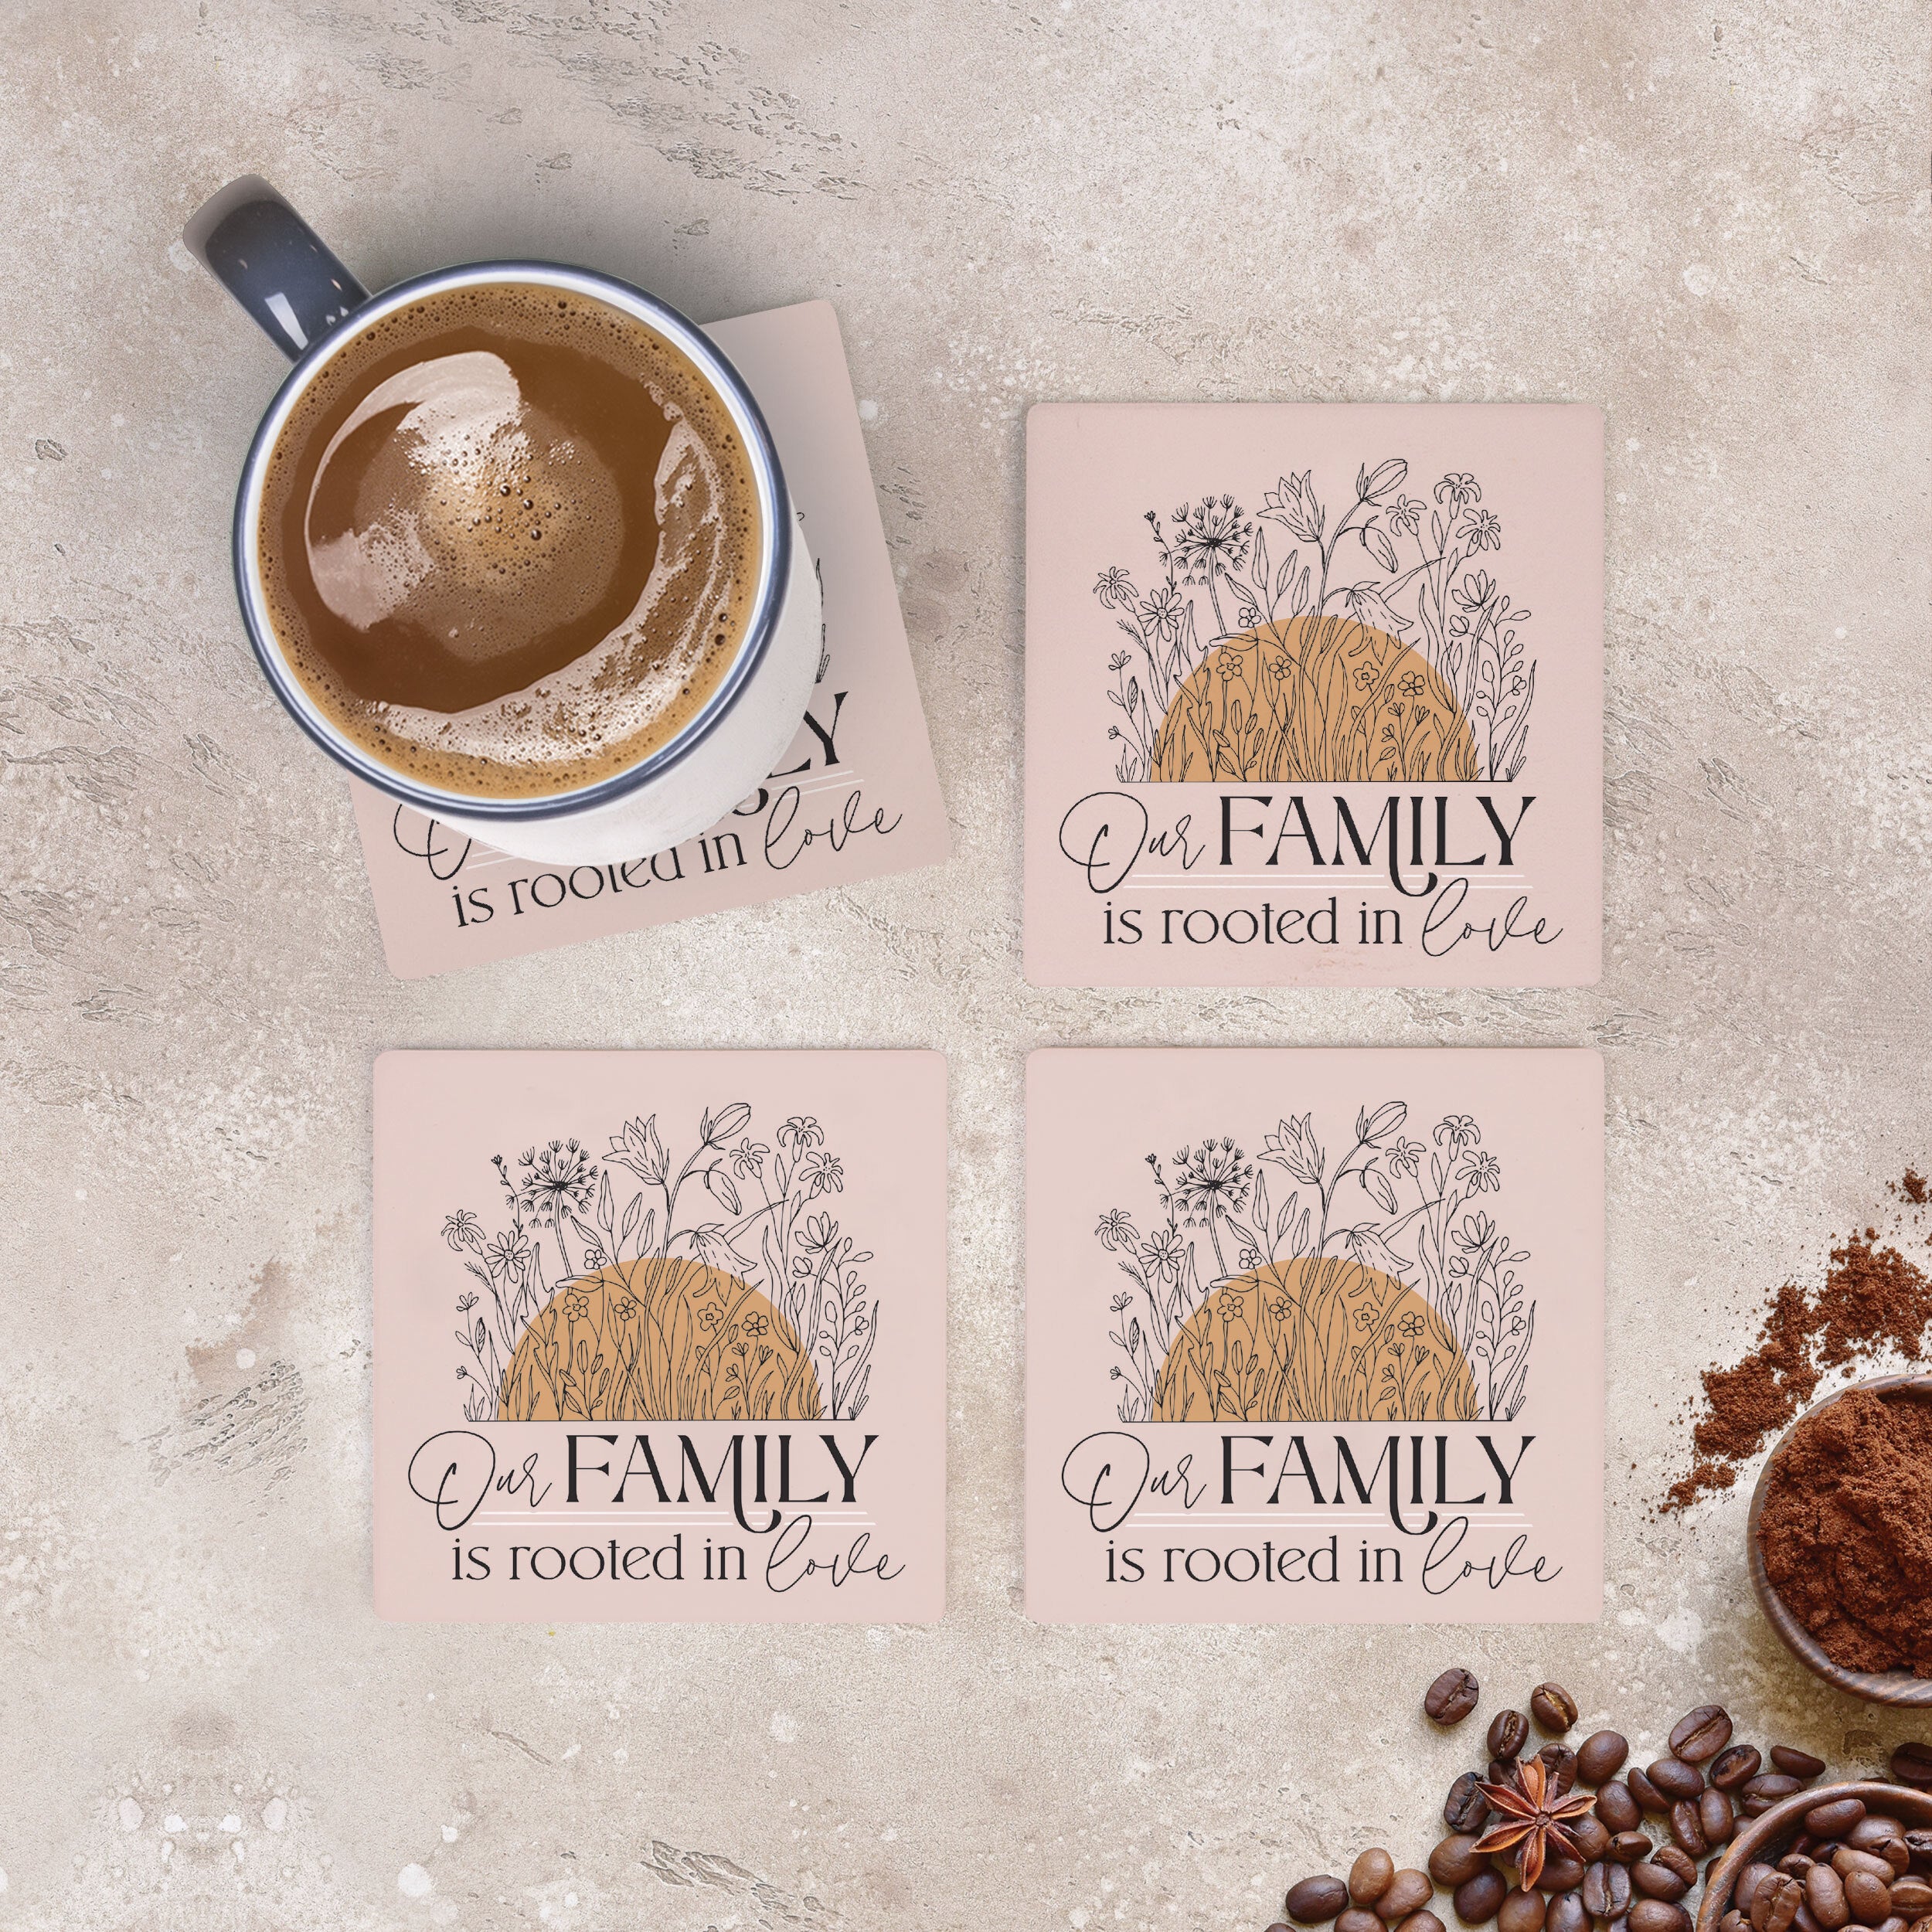 Our Family Is Rooted & Established In Love Ceramic Coaster